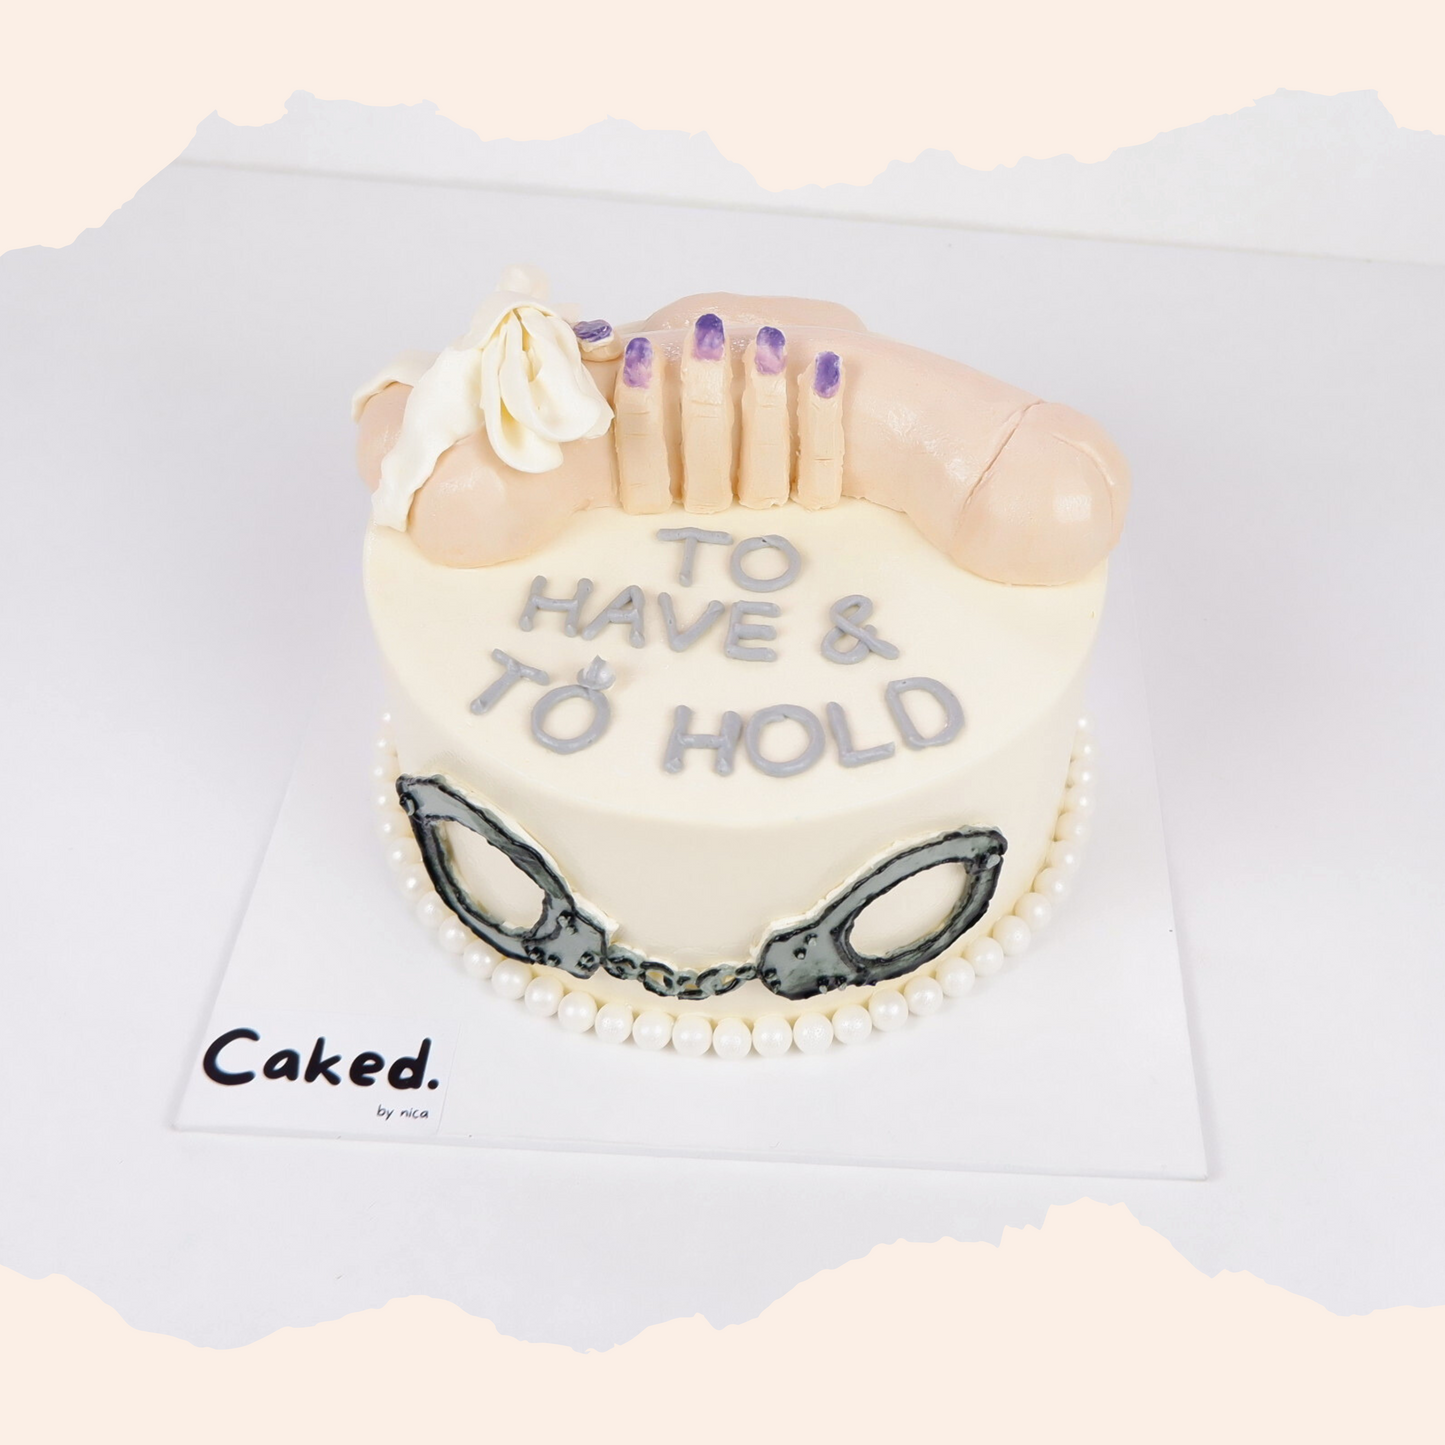 SPG Cake: To Have & To Hold